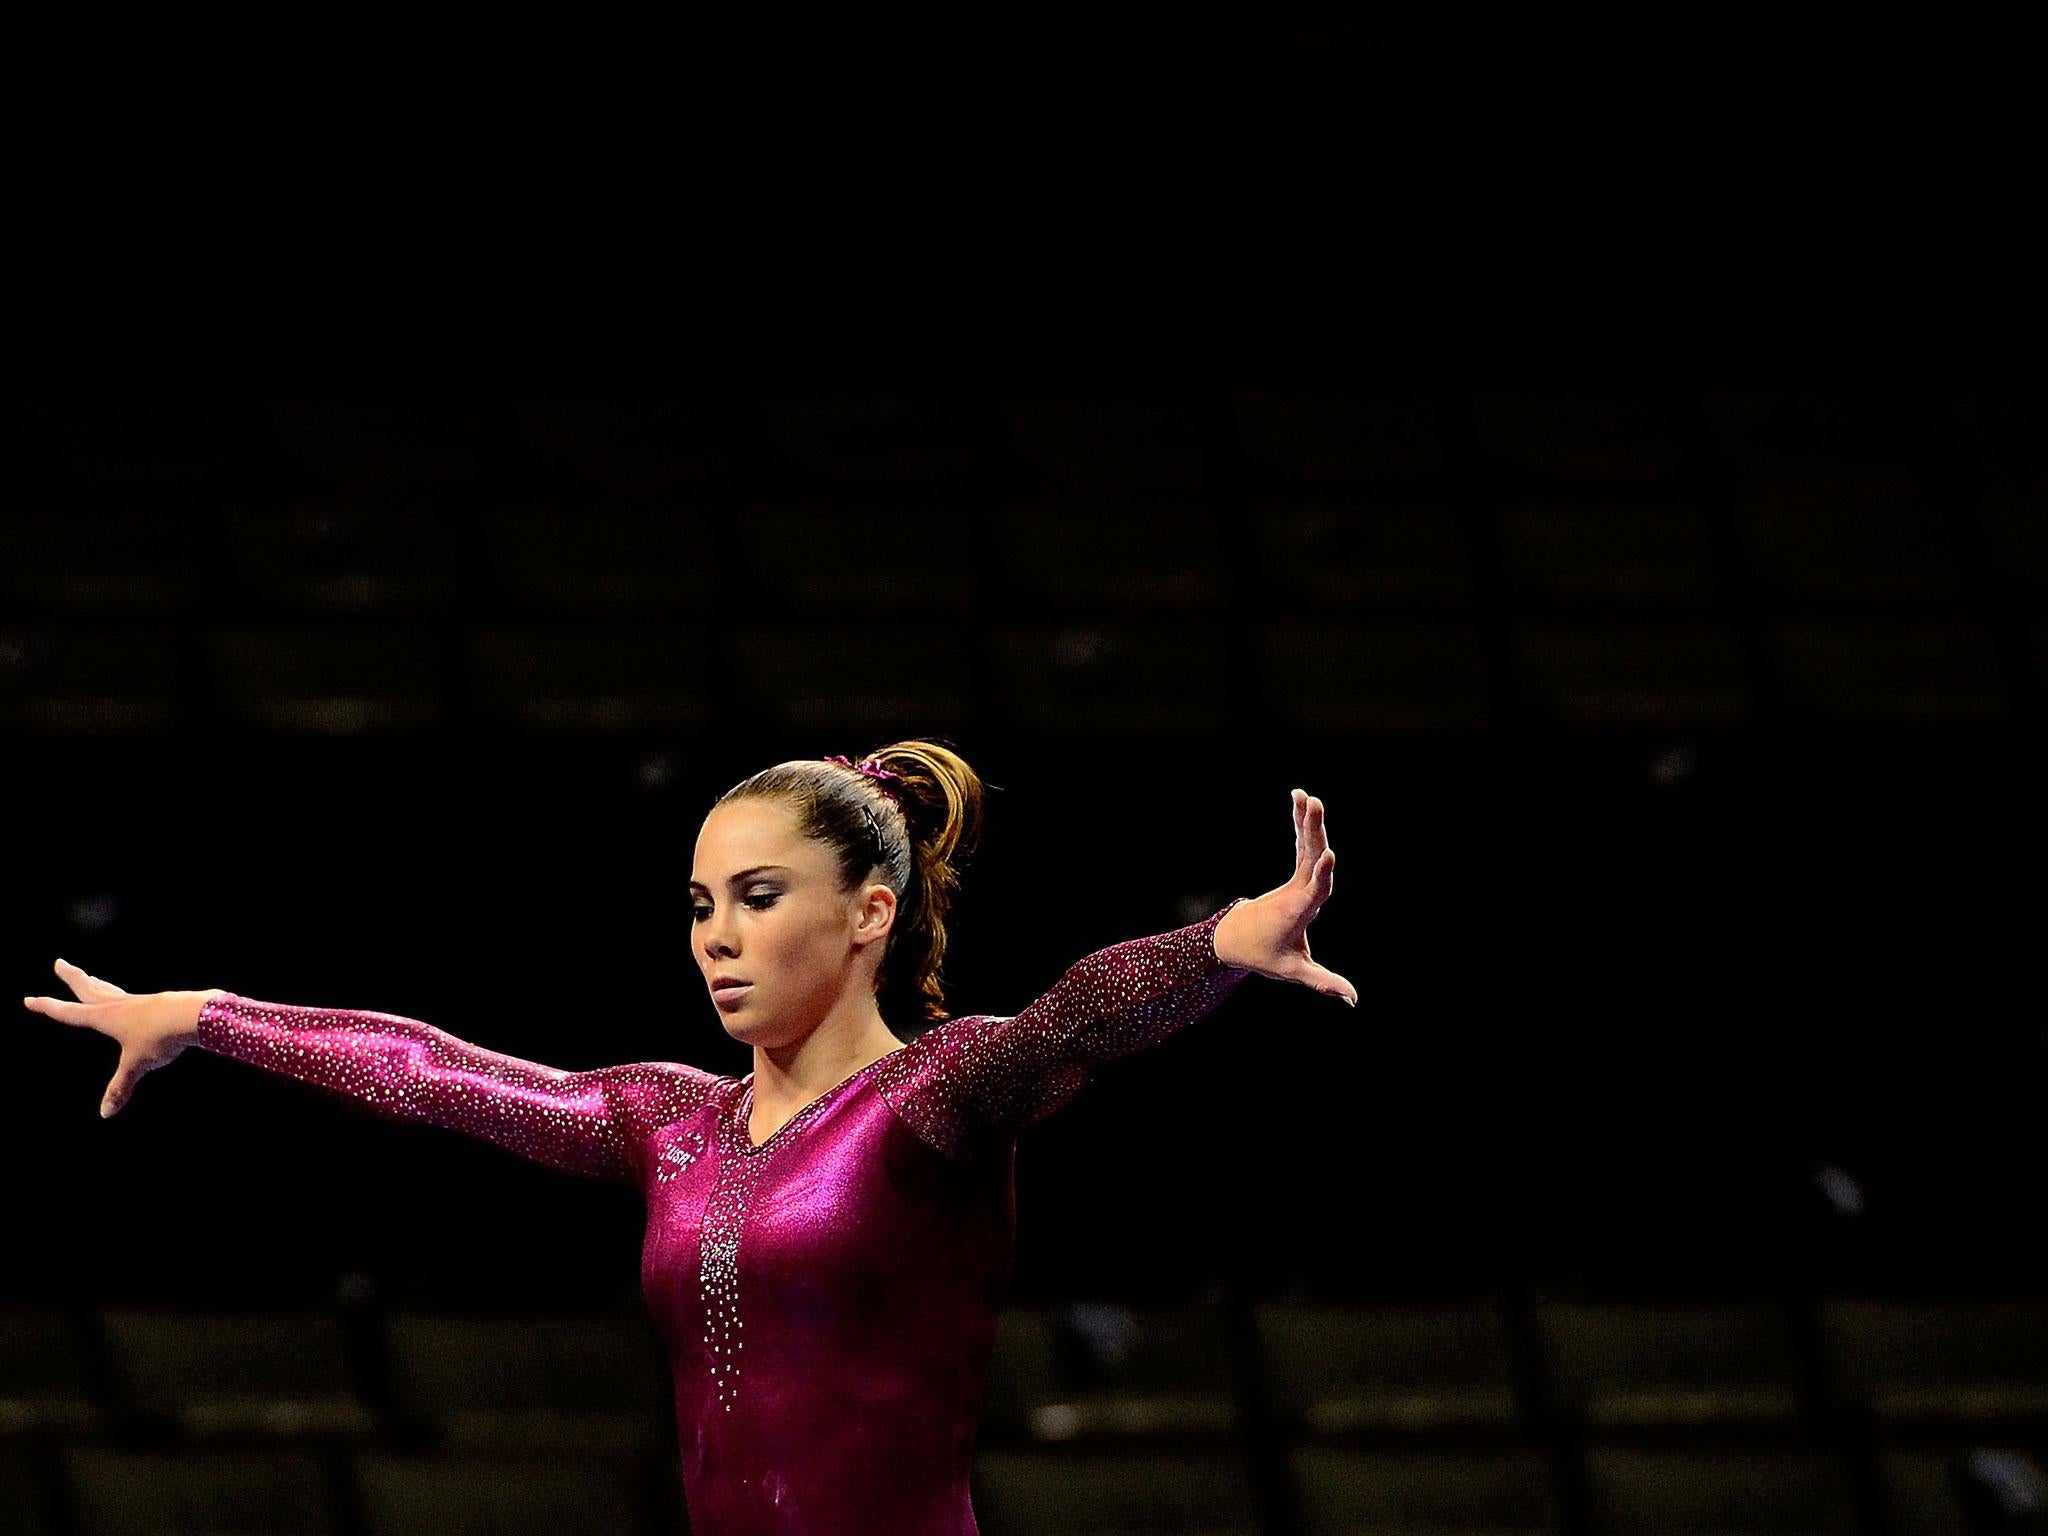 McKayla Maroney won gold and silver medals at the 2012 Games